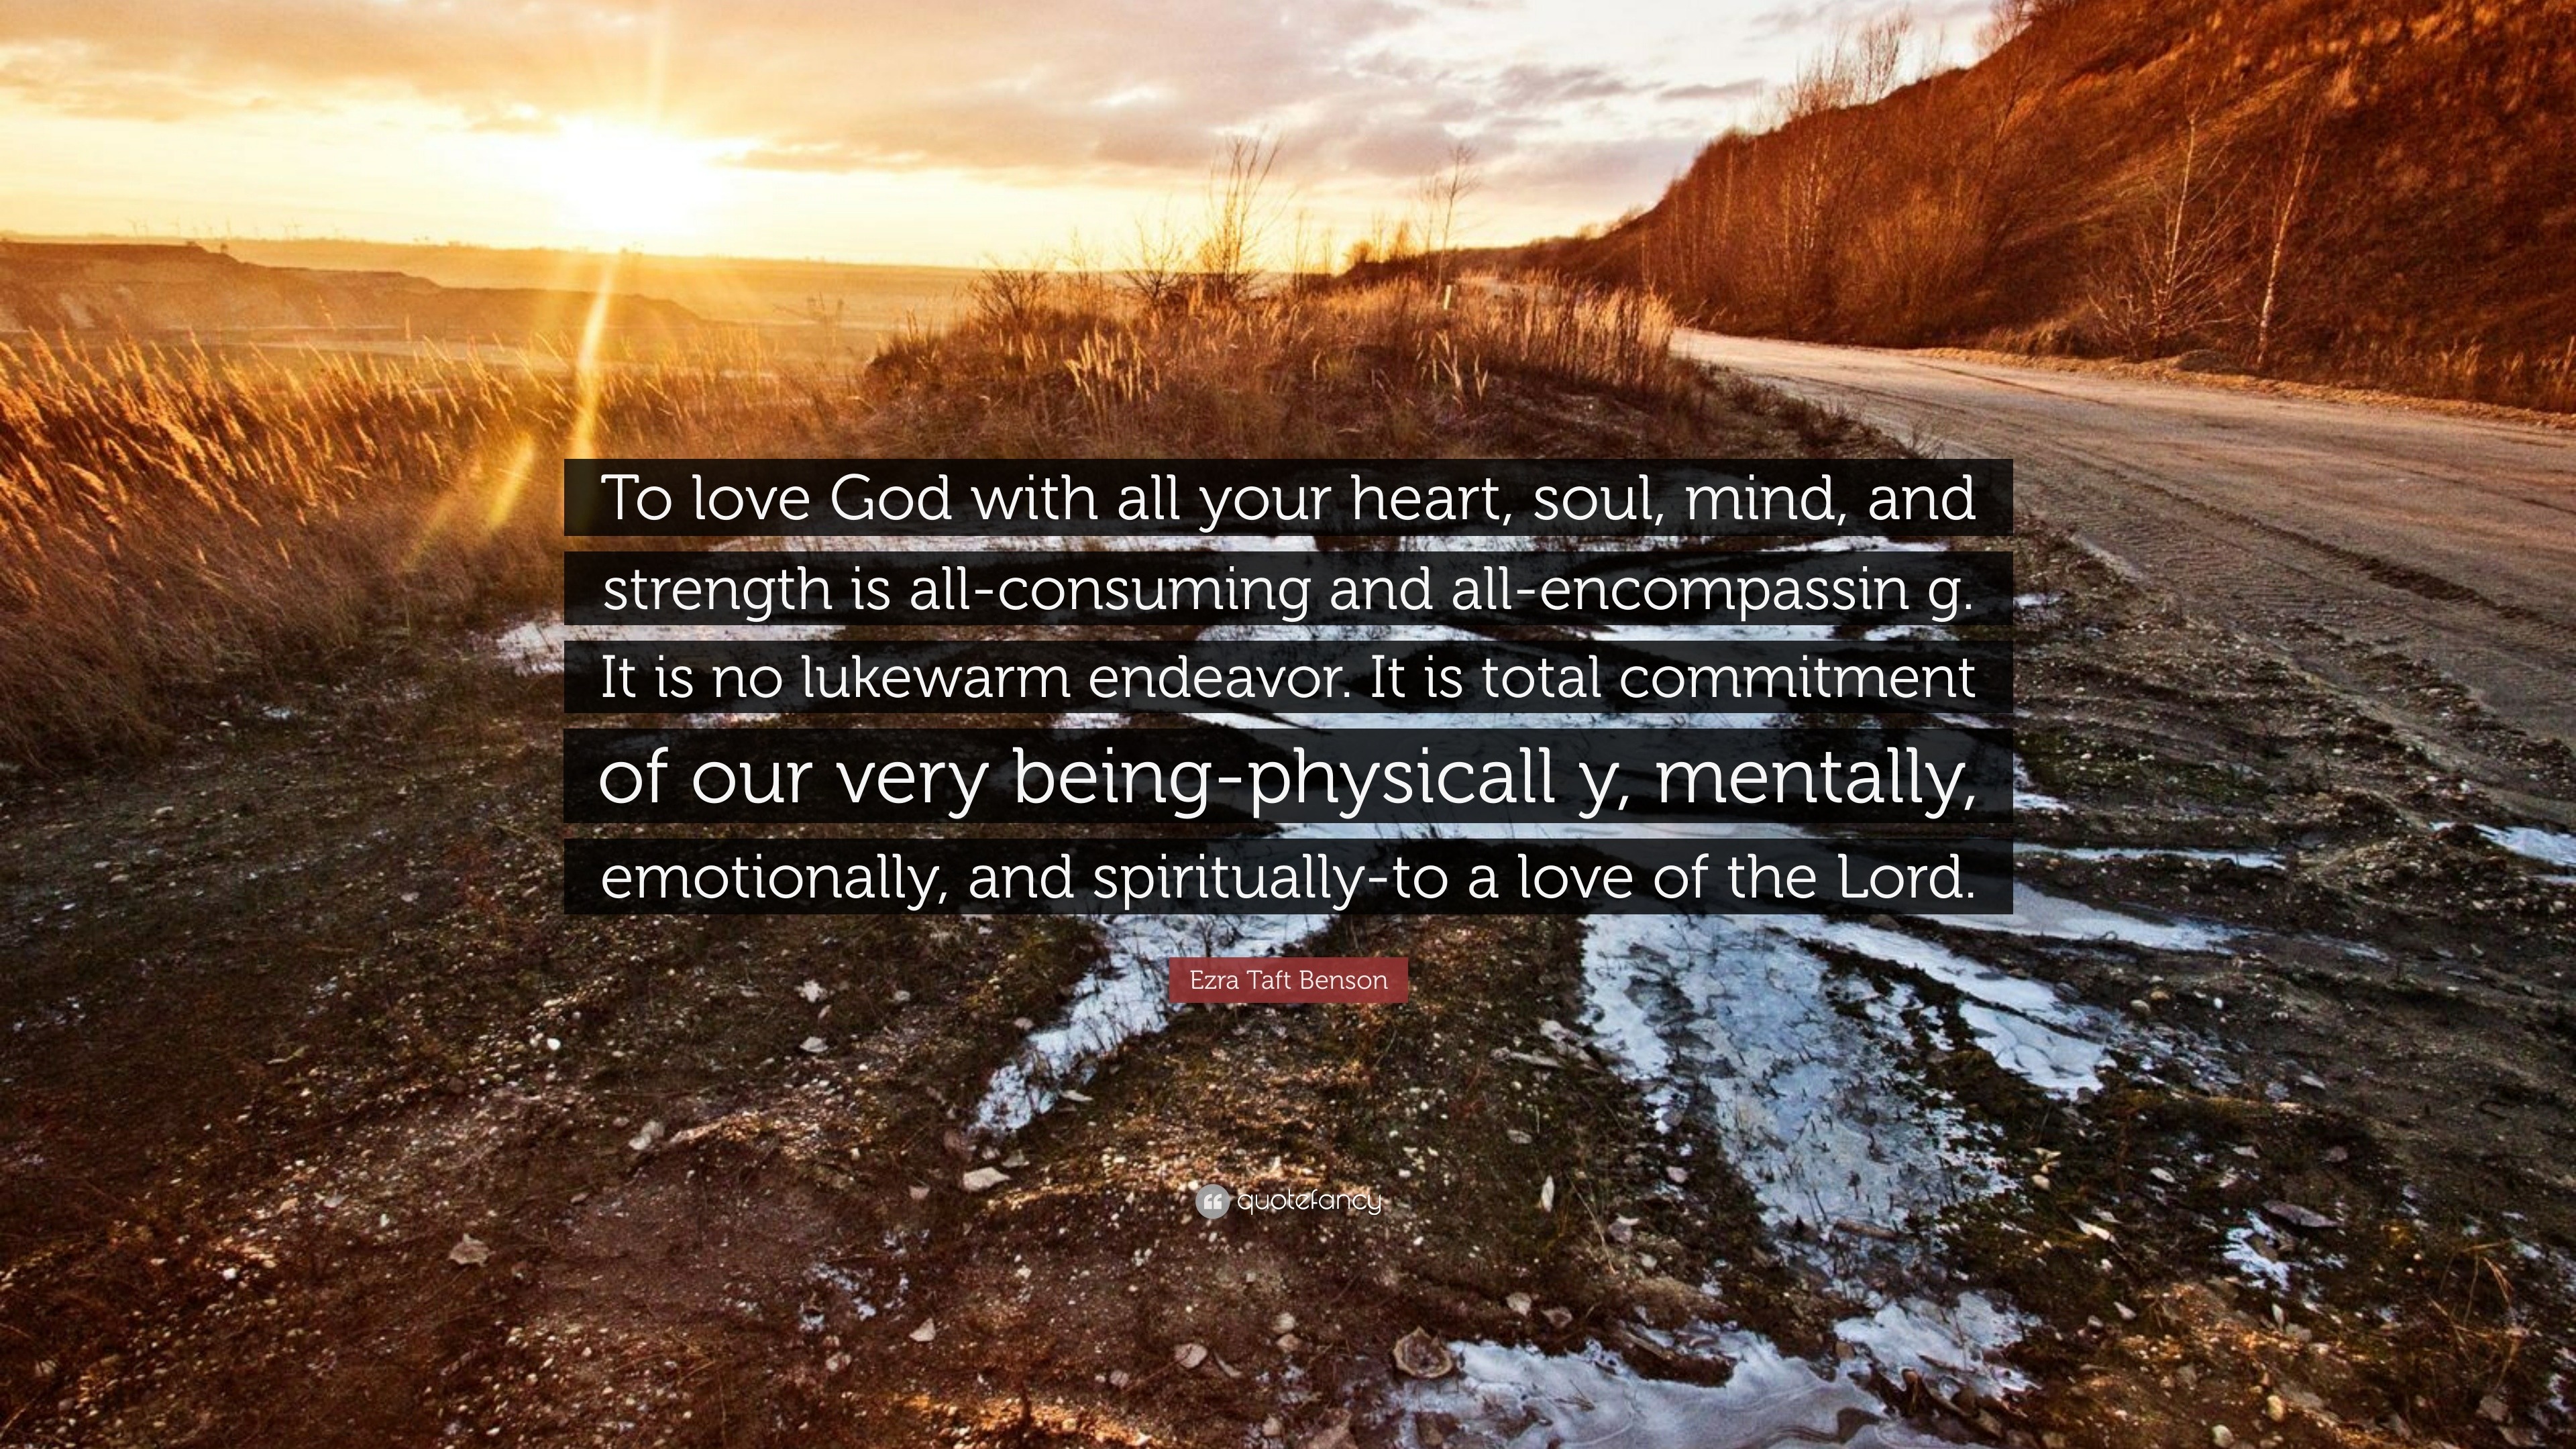 Ezra Taft Benson Quote “To love God with all your heart soul